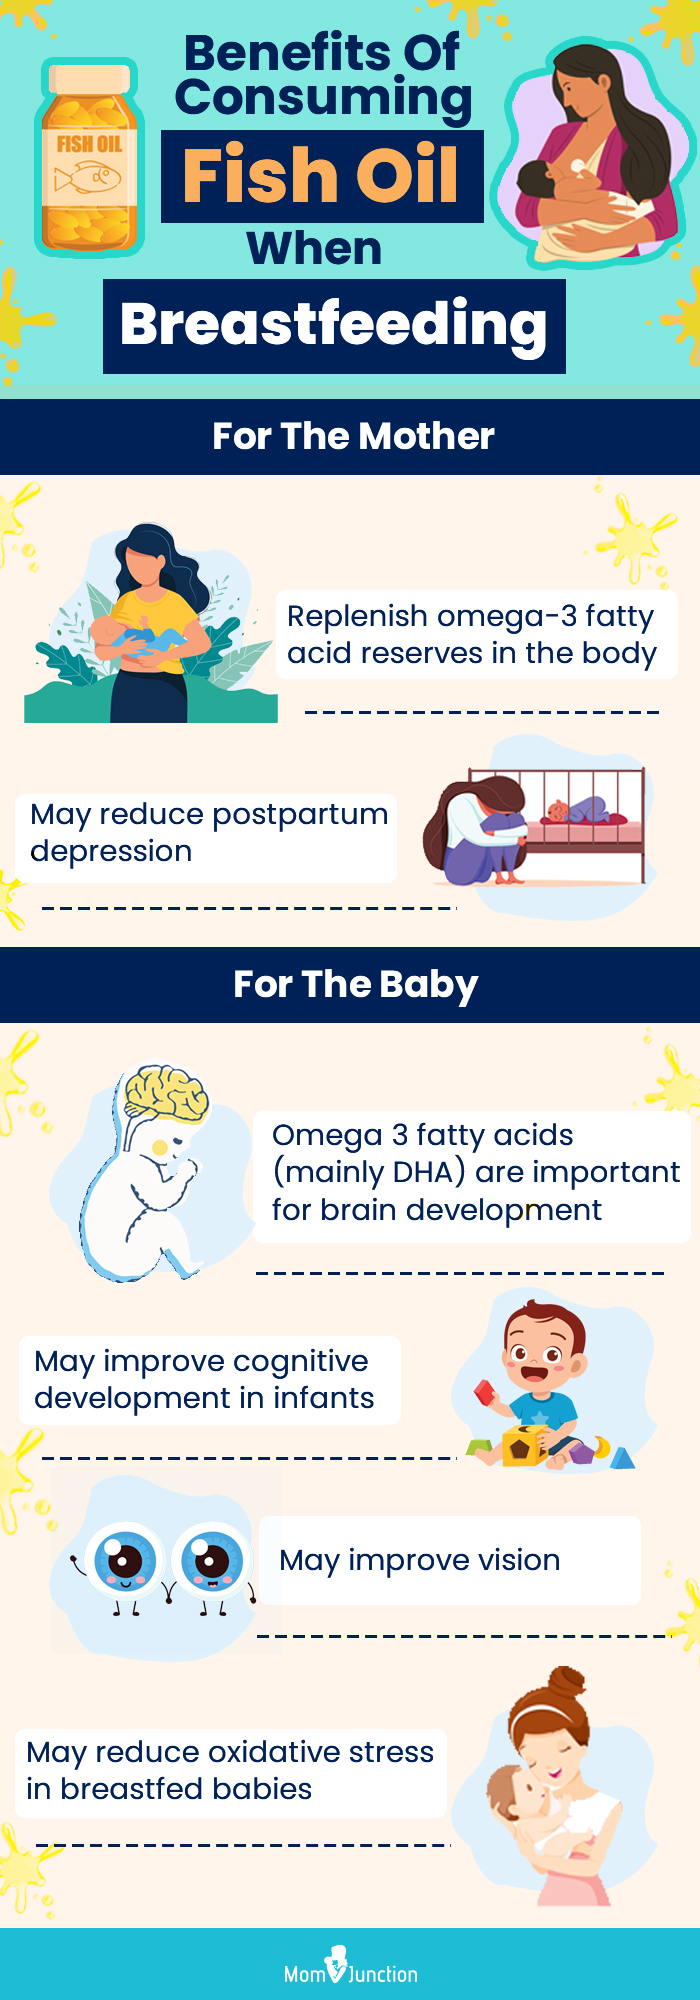 benefits of consuming fish oil when breastfeeding (infographic)